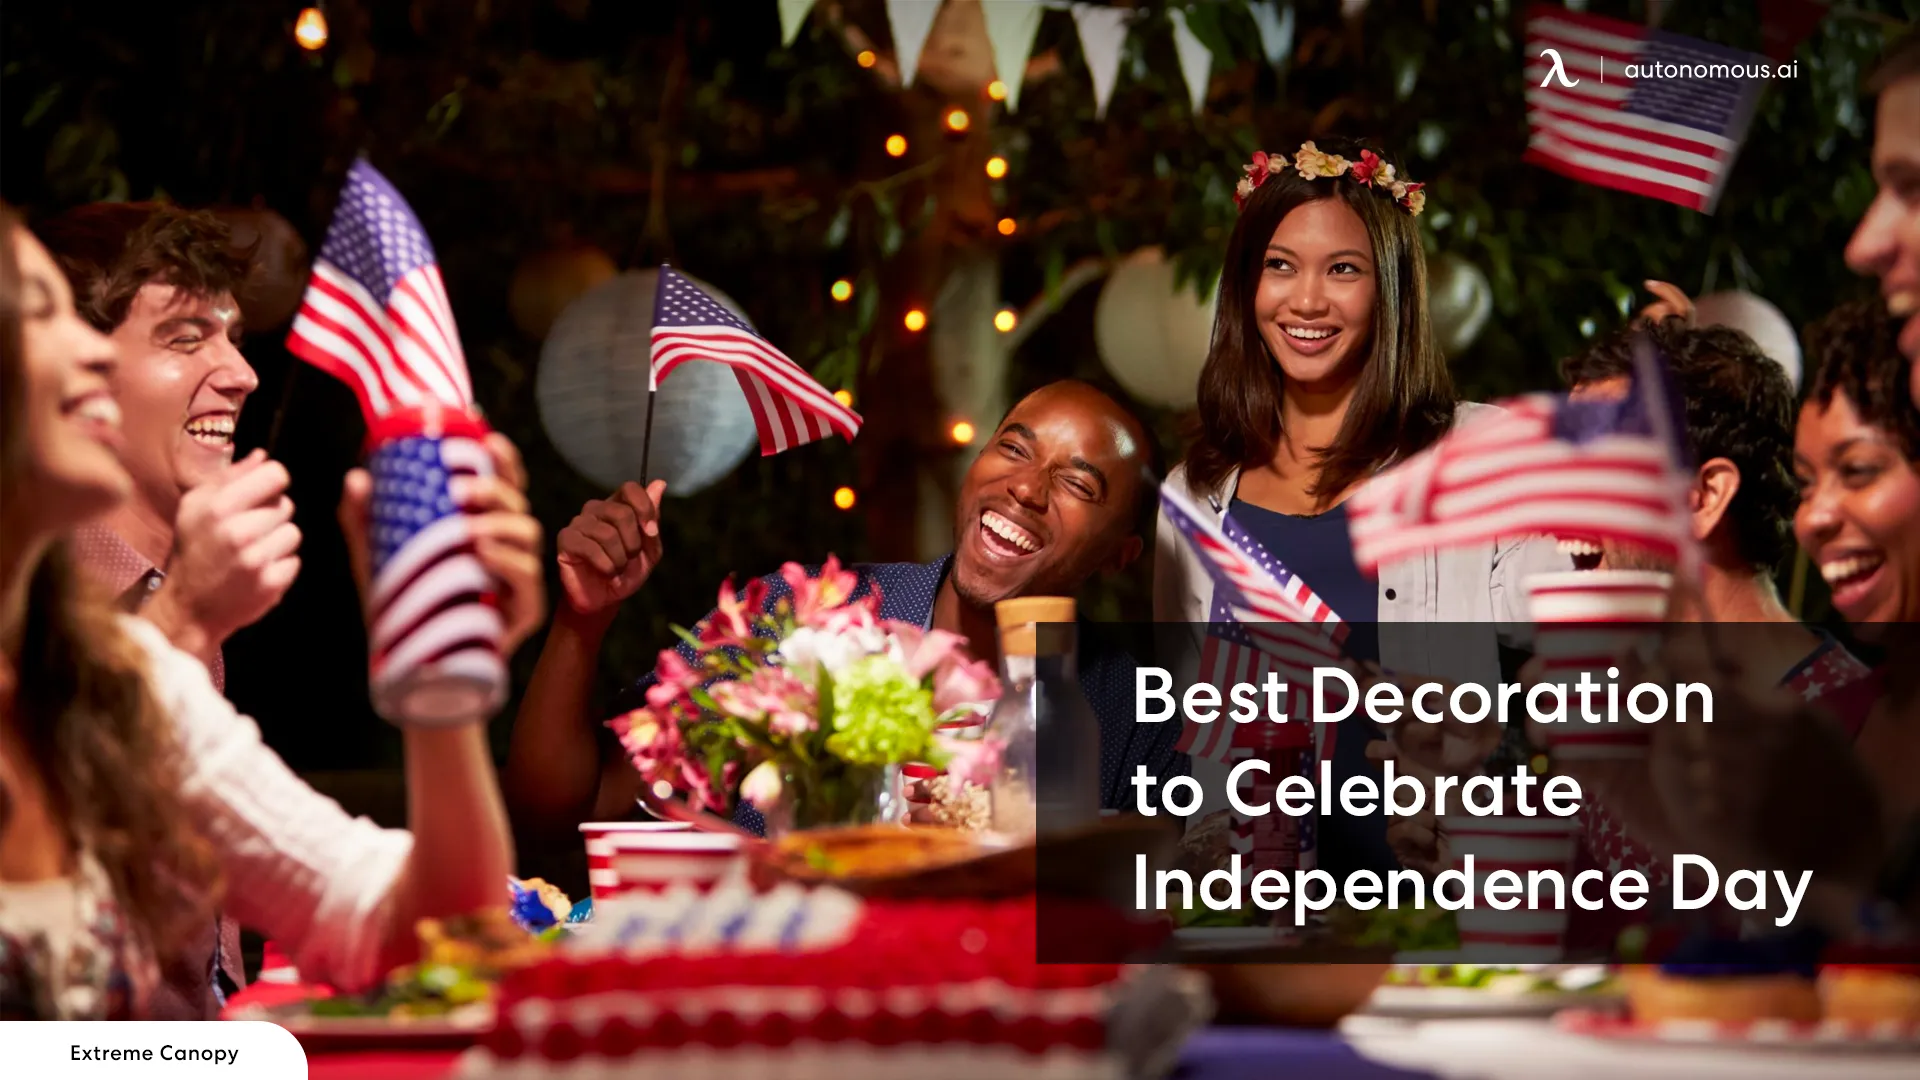 Celebrate Independence Day with Décor Ideas and Inspiration